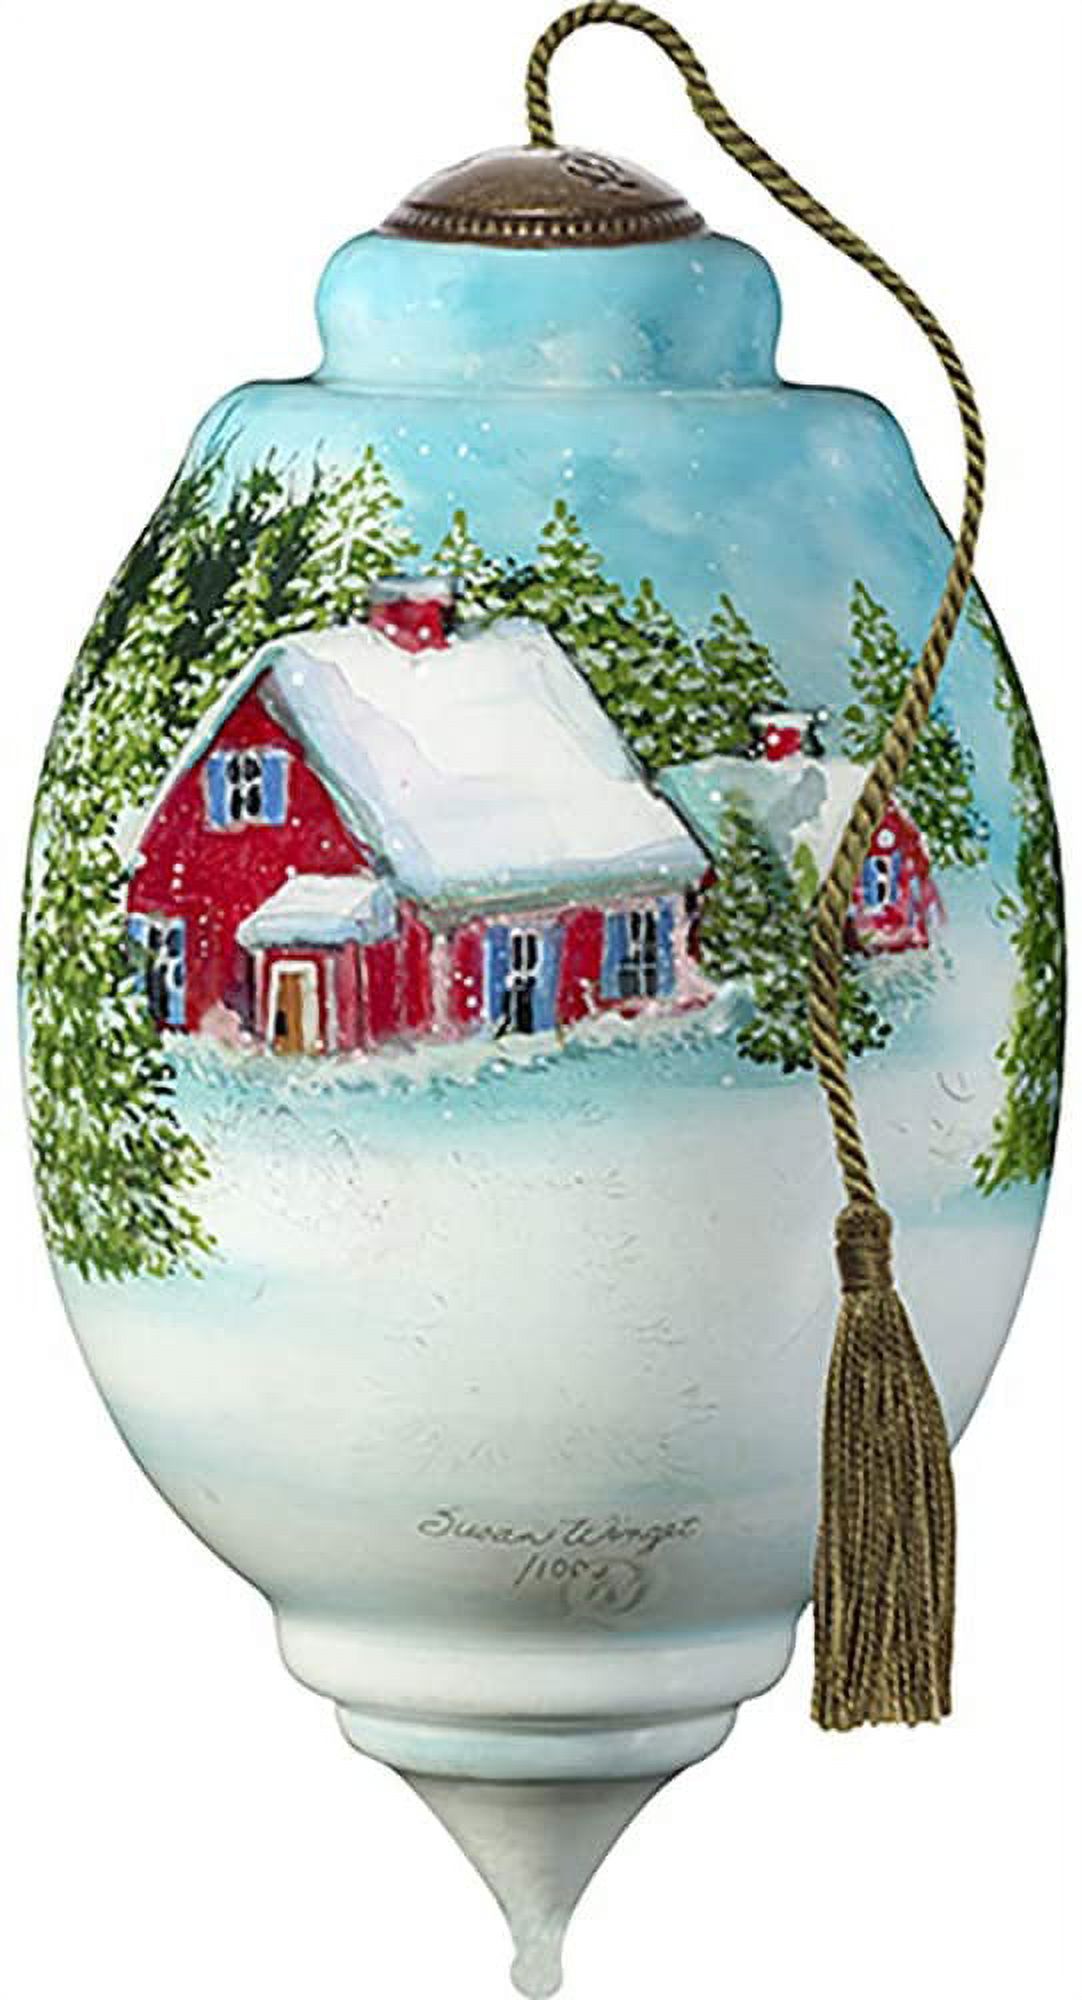 Ne'Qwa Limited Edition Wintery House and Snowman in Woods Ornament #7201103 - image 2 of 5